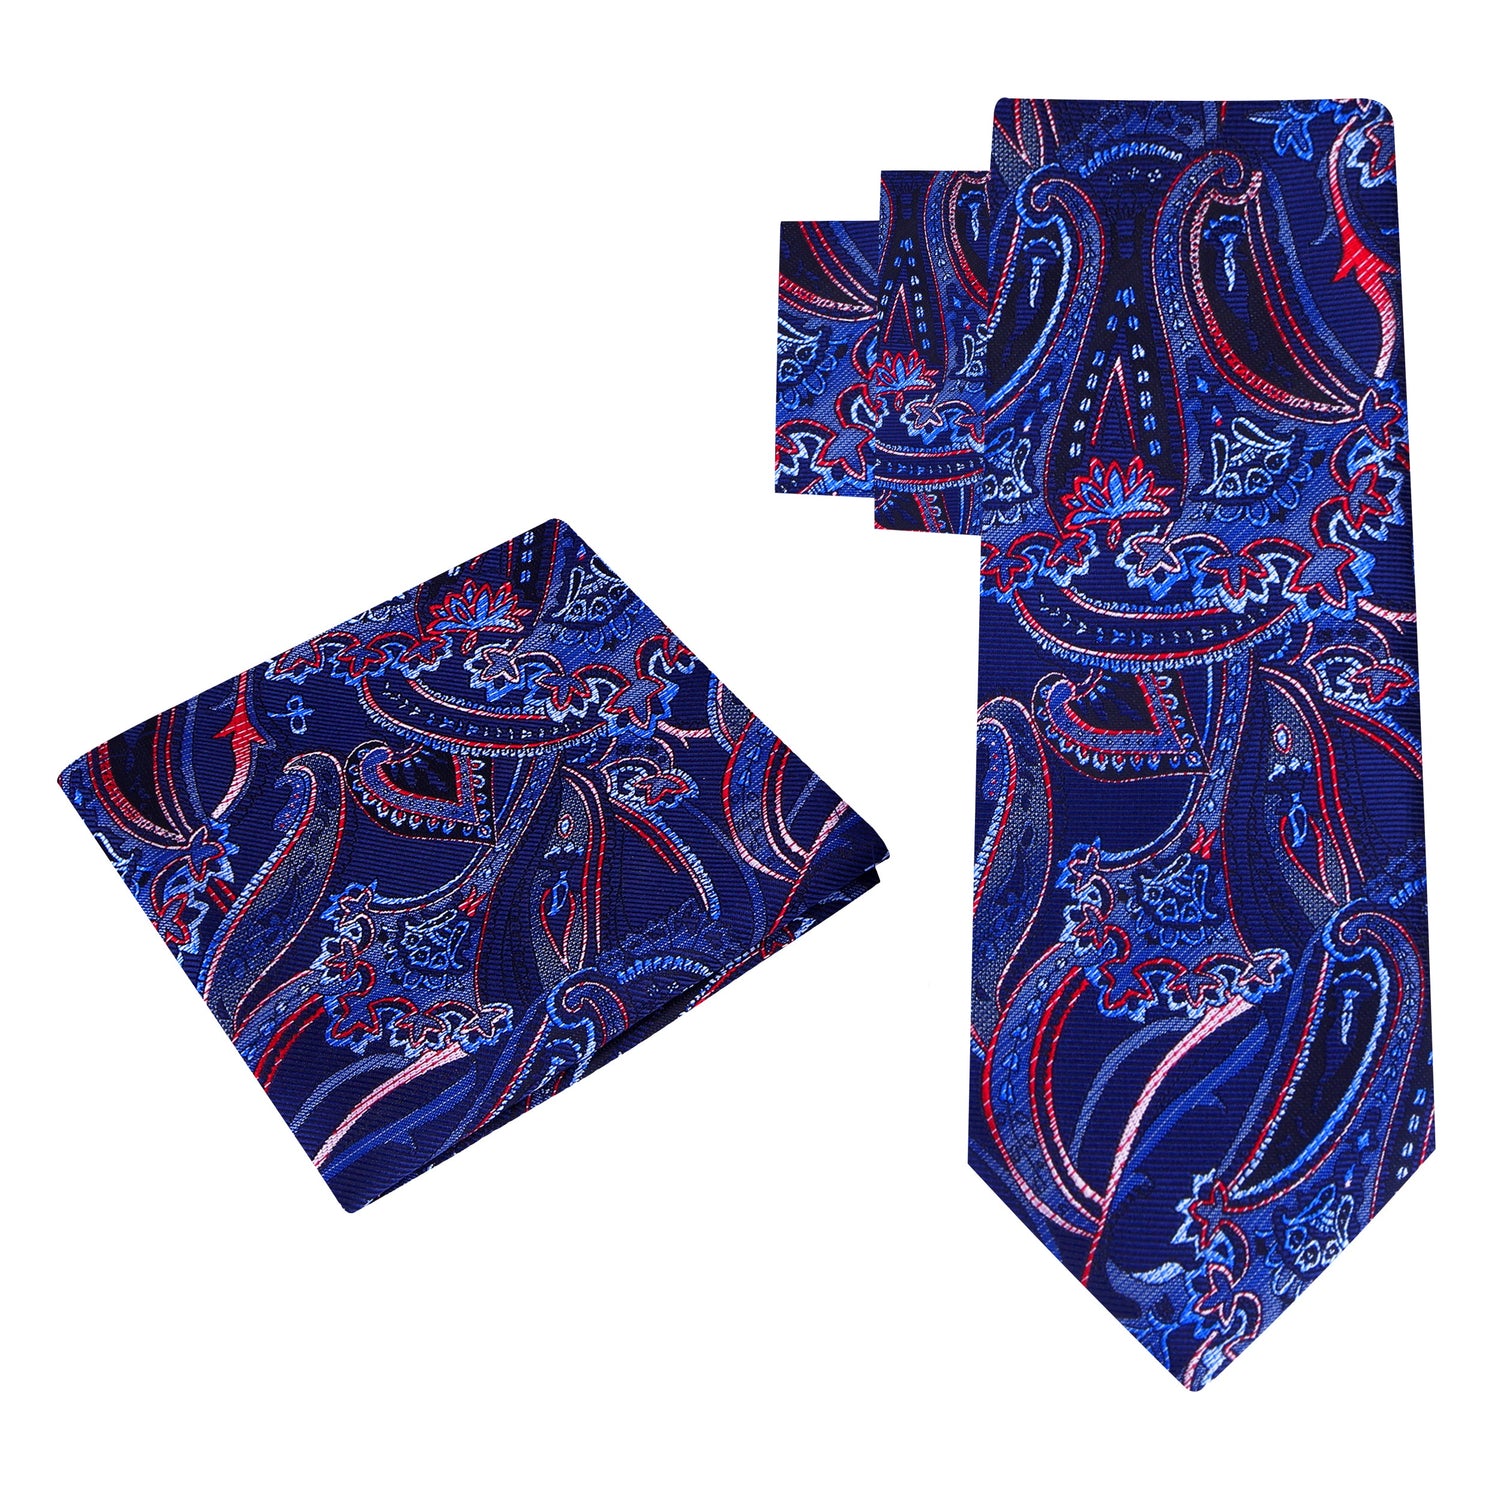 Alt View: A Blue, Red Paisley Pattern Silk Necktie, Matching Pocket Square 